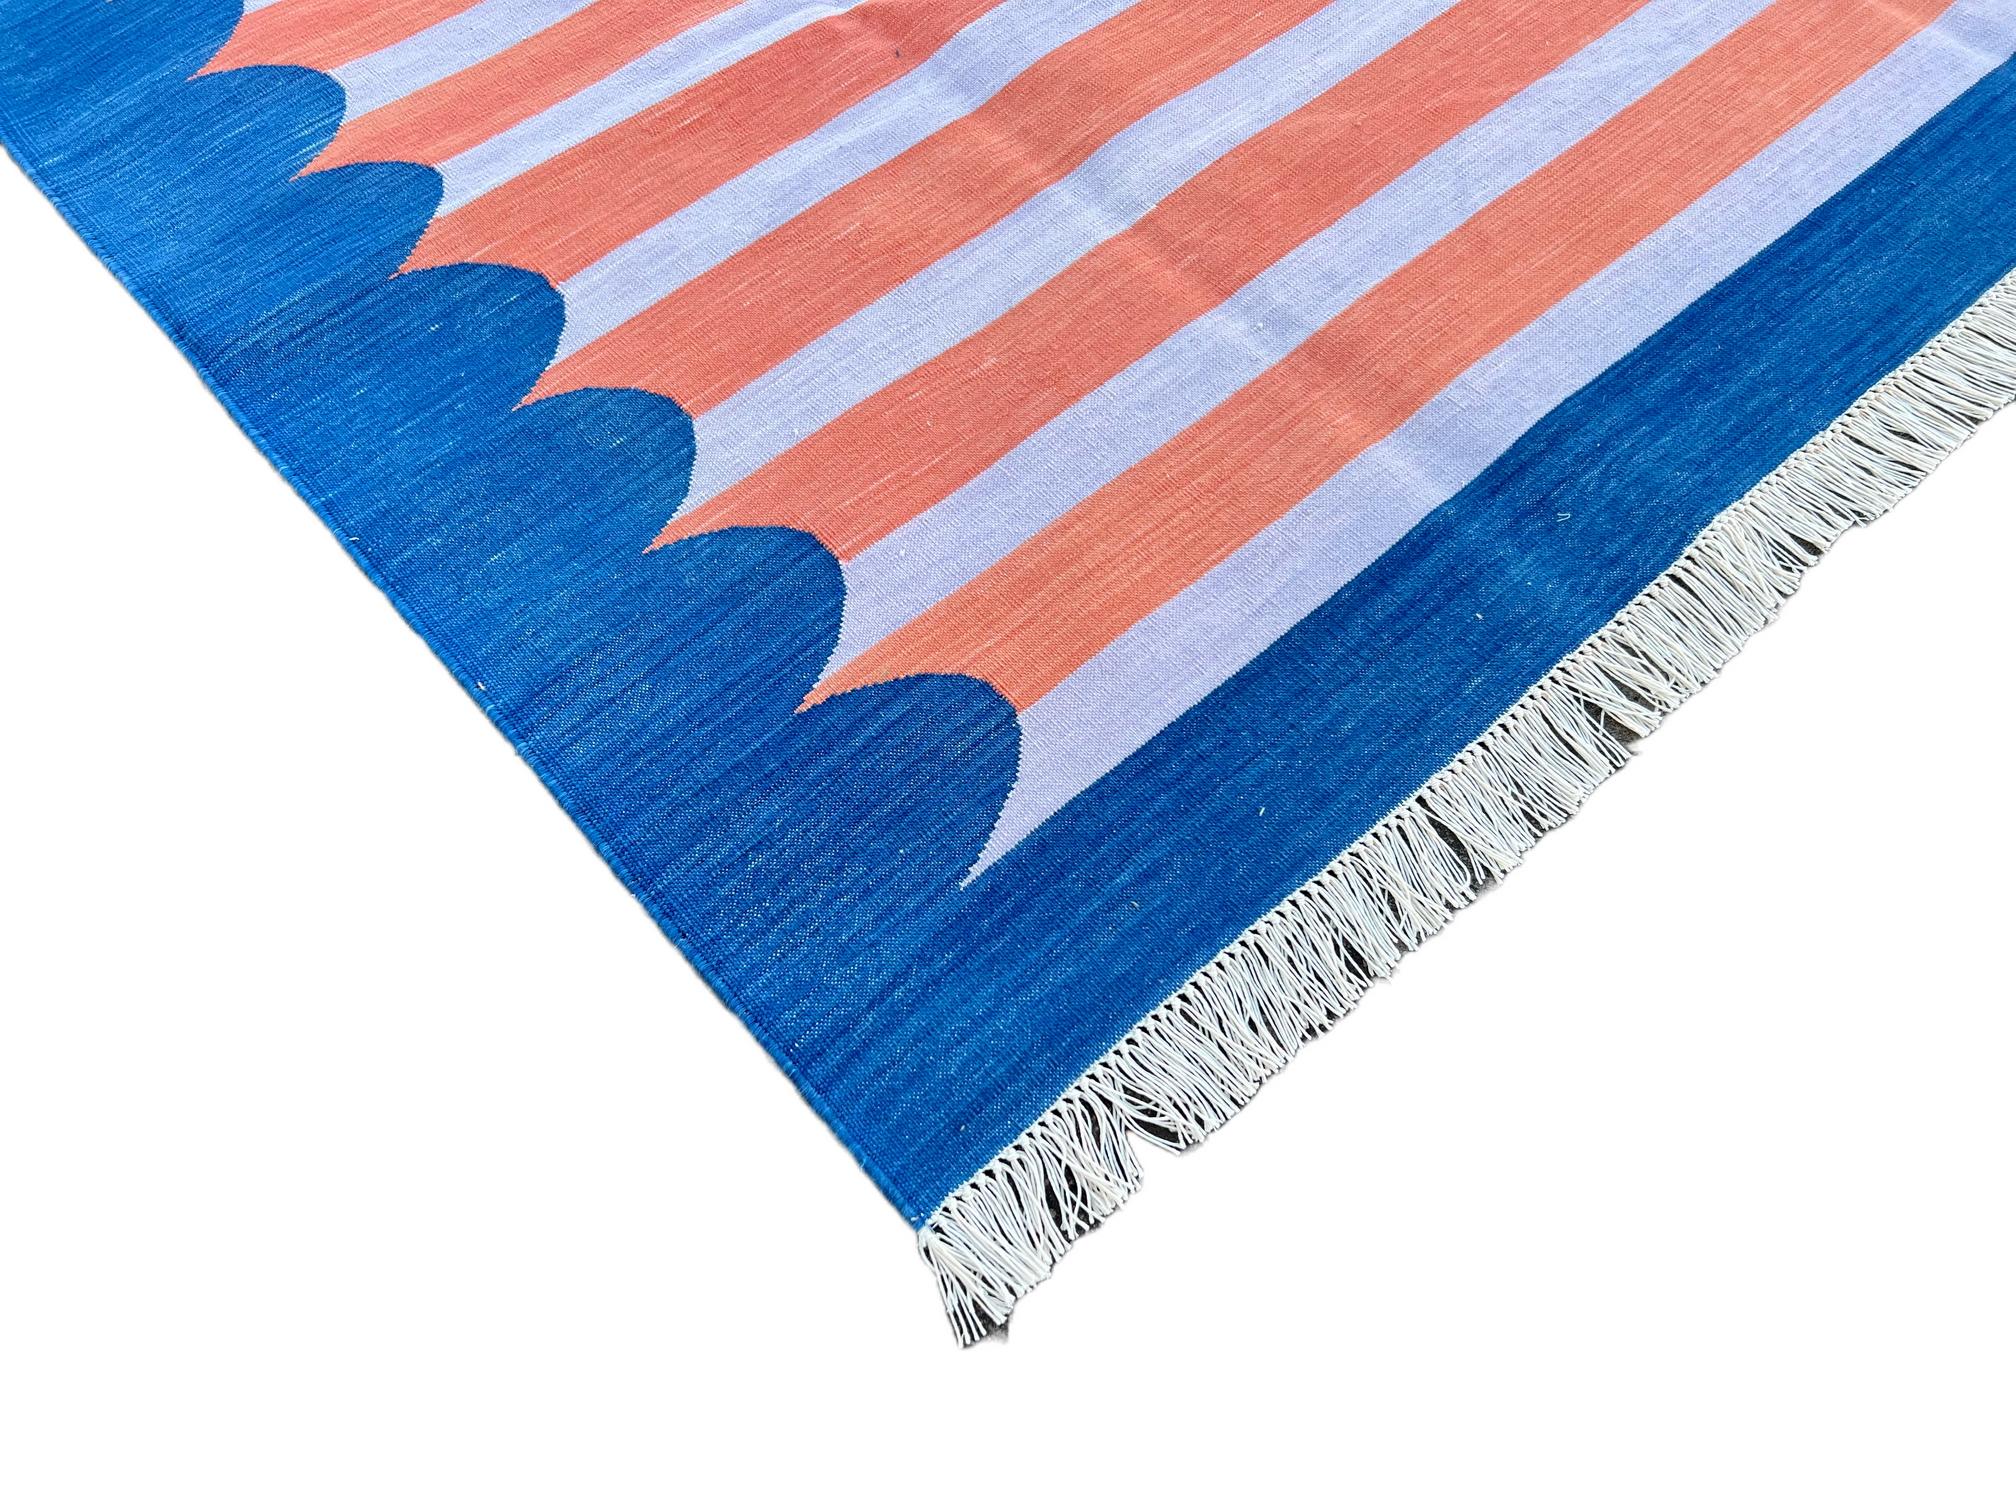 Cotton Vegetable Dyed Coral, Lavender And Indigo Blue Scalloped Striped Indian Dhurrie Rug-6'x9' 
These special flat-weave dhurries are hand-woven with 15 ply 100% cotton yarn. Due to the special manufacturing techniques used to create our rugs, the